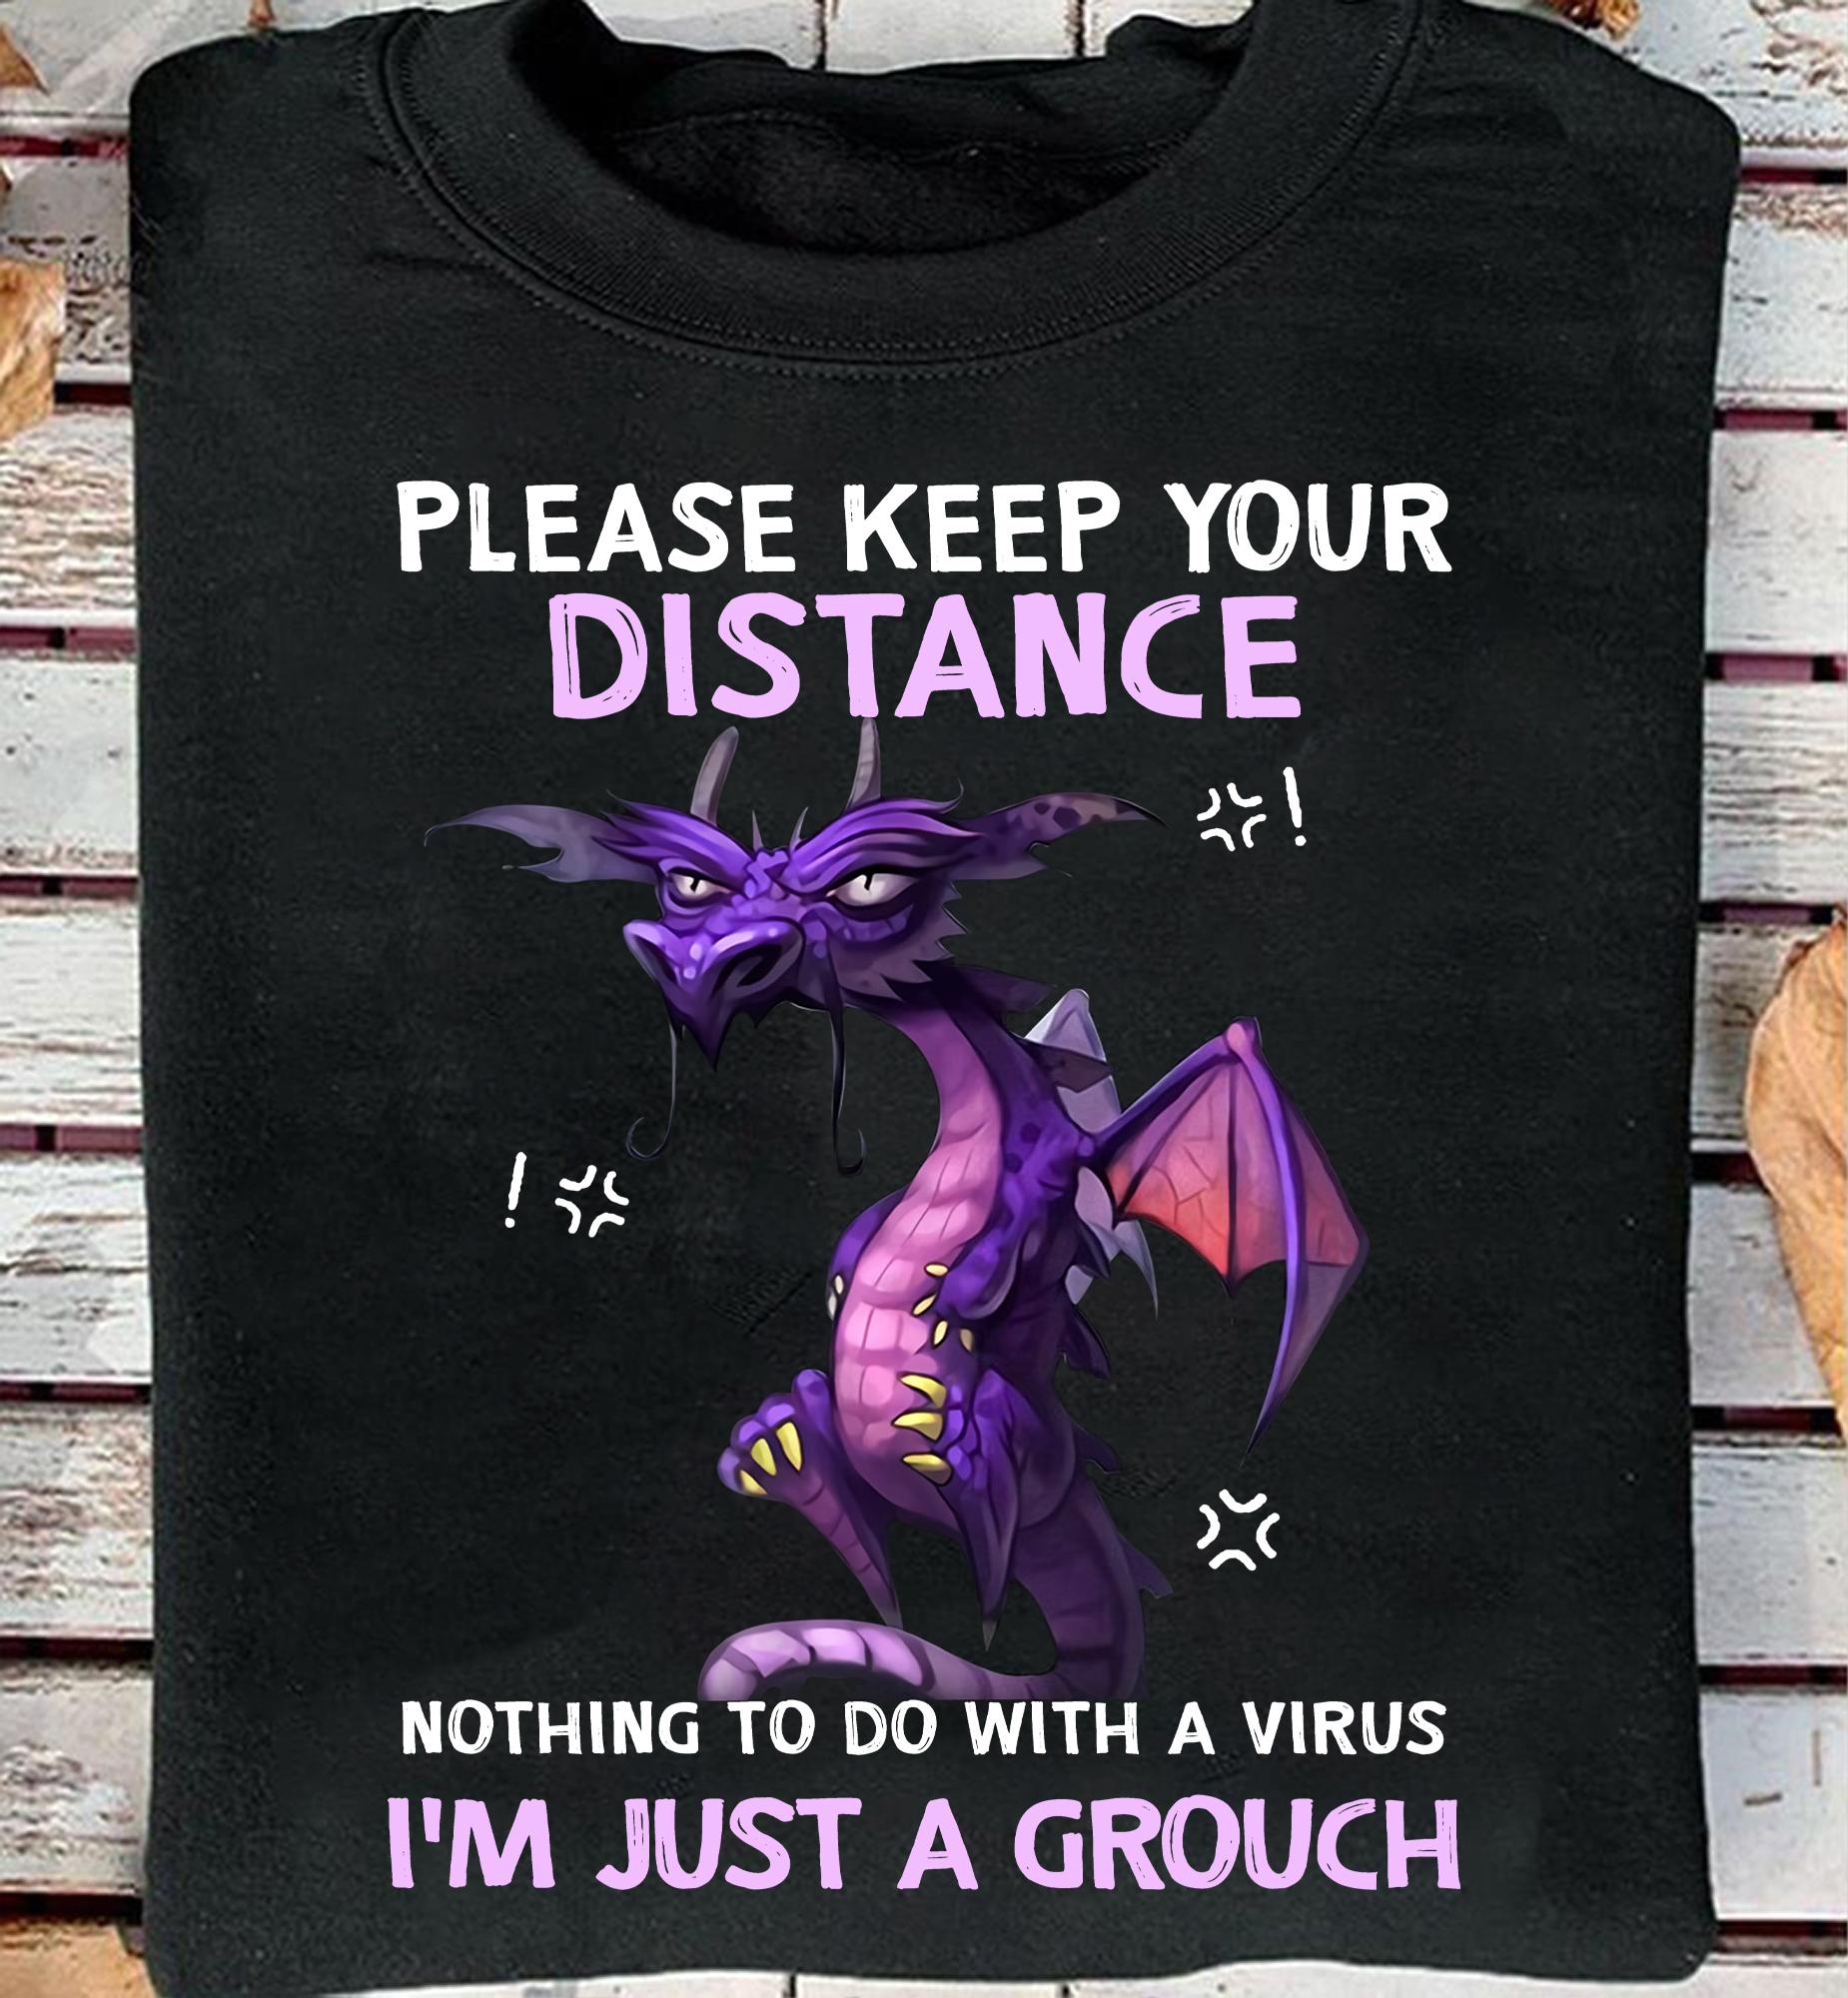 Please keep your distance, nothing to do with a virus I'm just a grouch - Purple dragon, social distancing